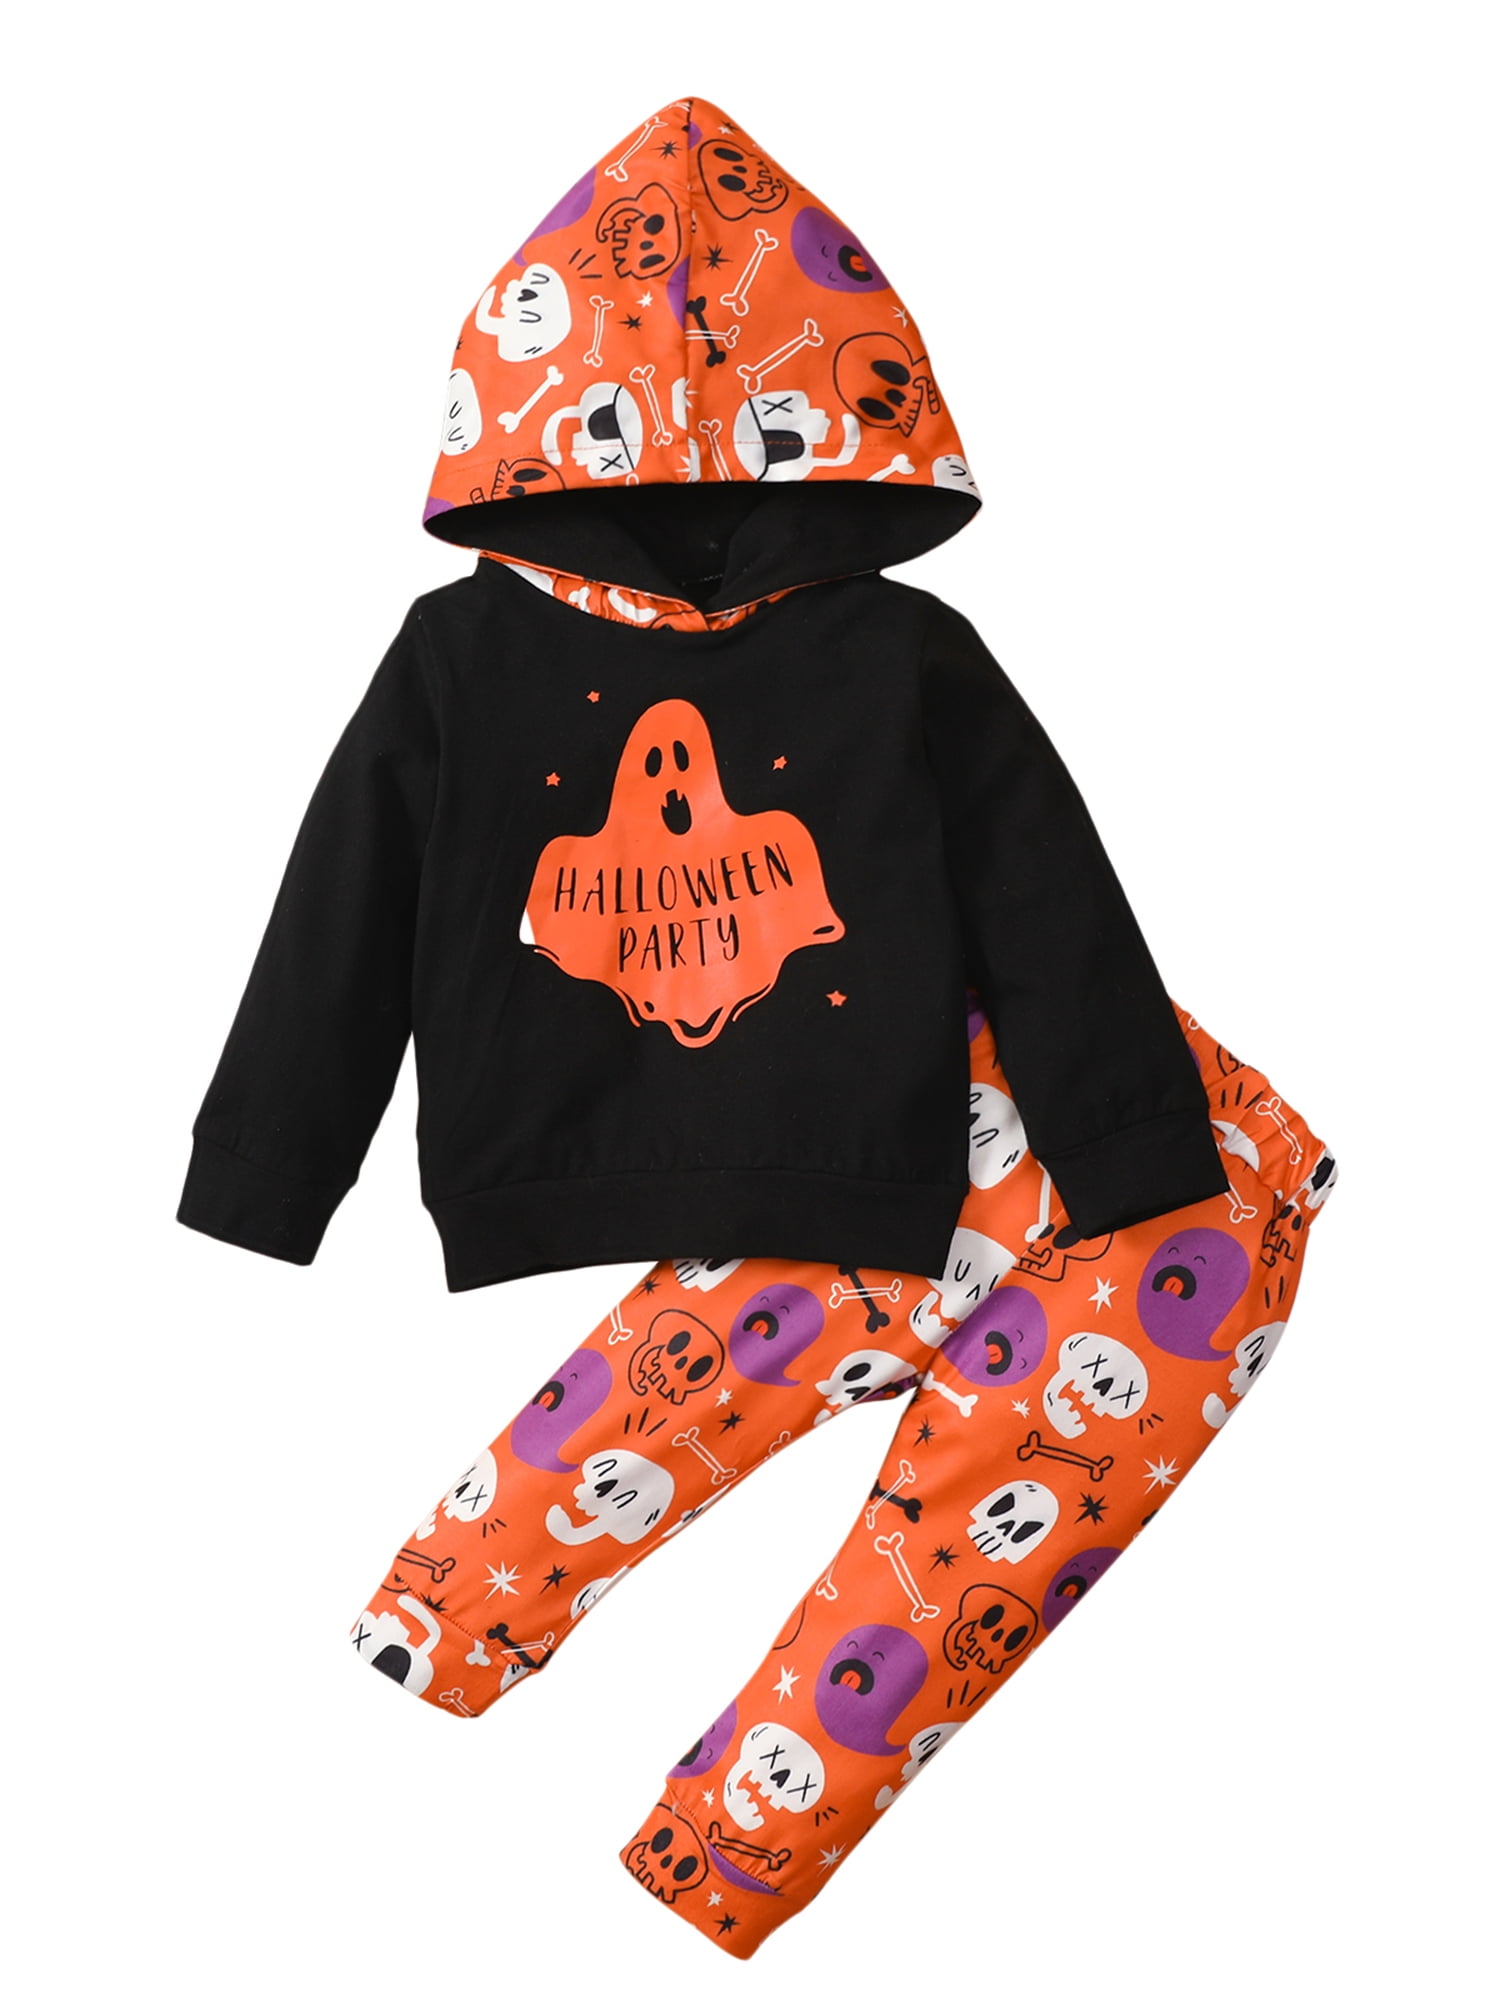 Long Pants Clothing Set for Kids Halloween Costume Outfits Gifts Weant Newborn Infant Toddler Baby Clothes Flower Skull Hoodies Sweatshirts Boys Girls Unisex Clothes for 0-24 Months